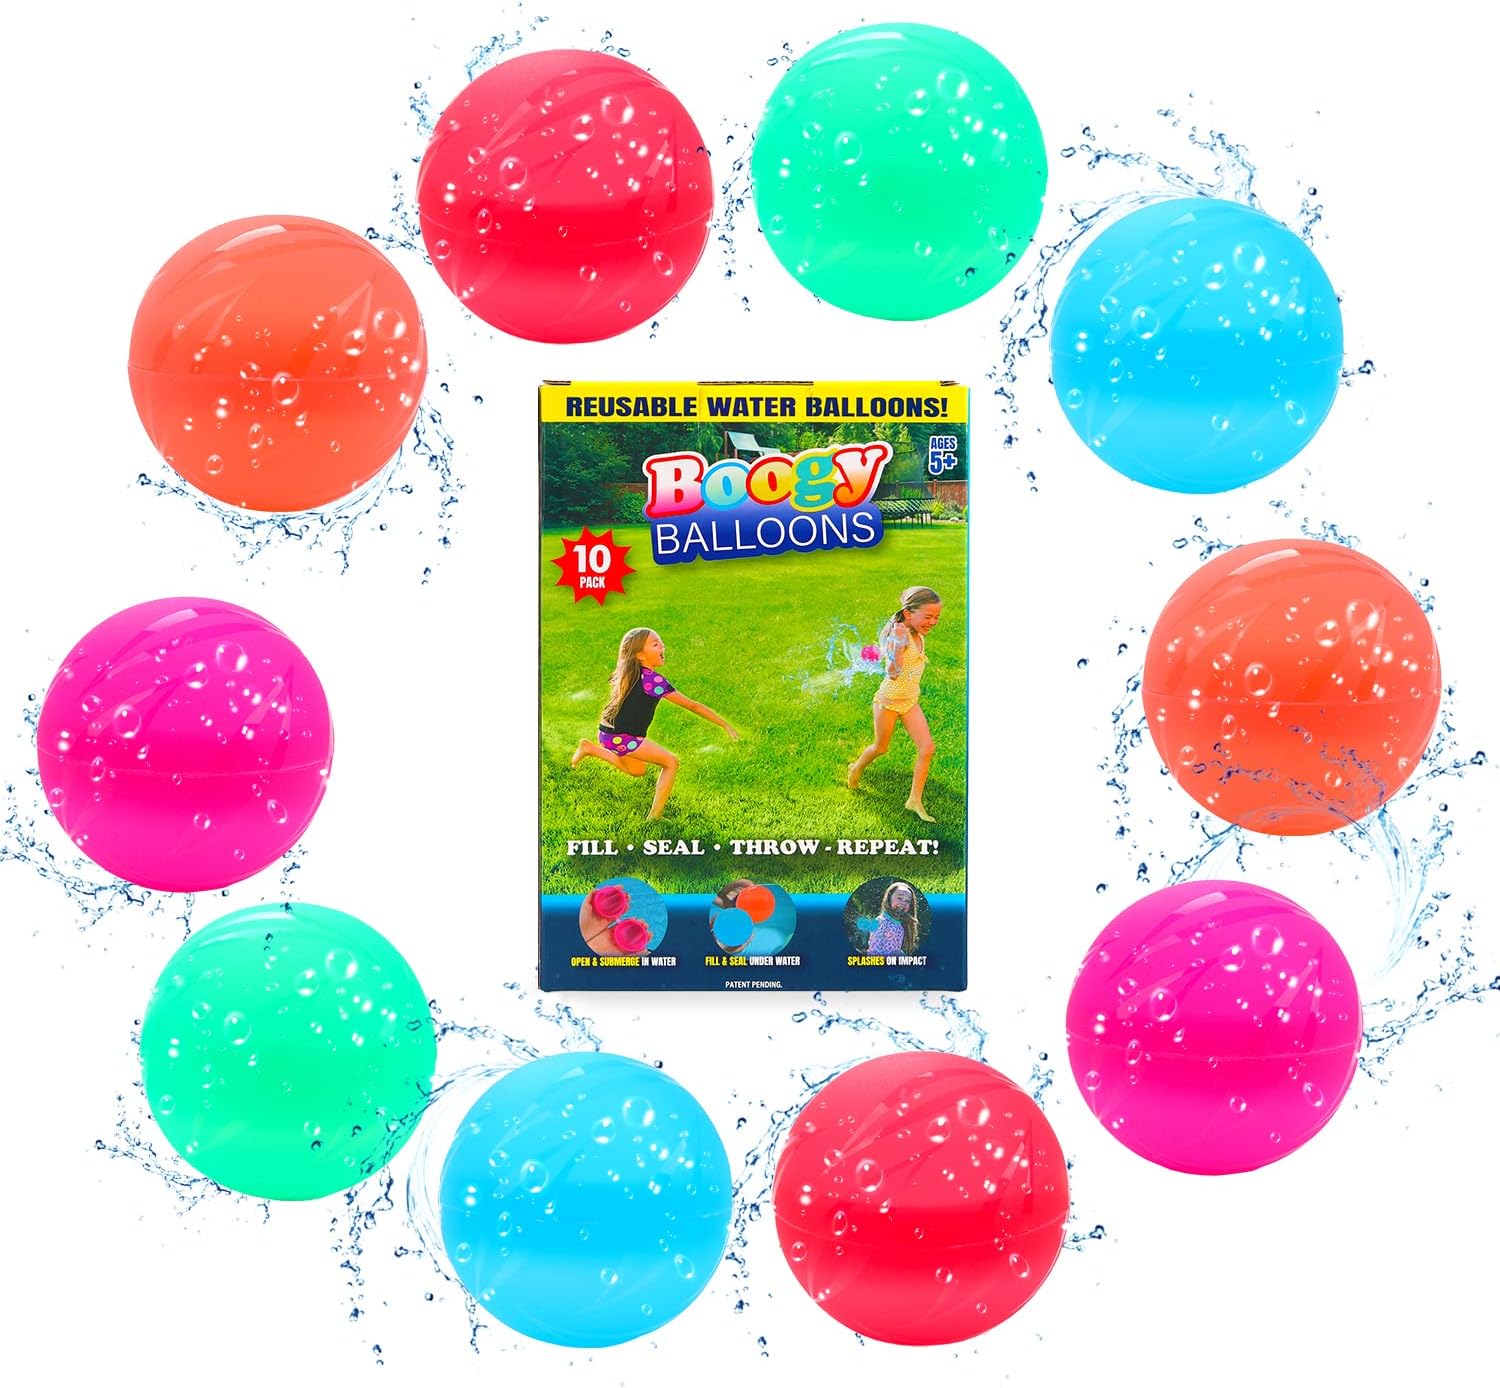 Boogy Balloons, Reusable Water Balloons, Easy to Fill (10 Pack) - $5